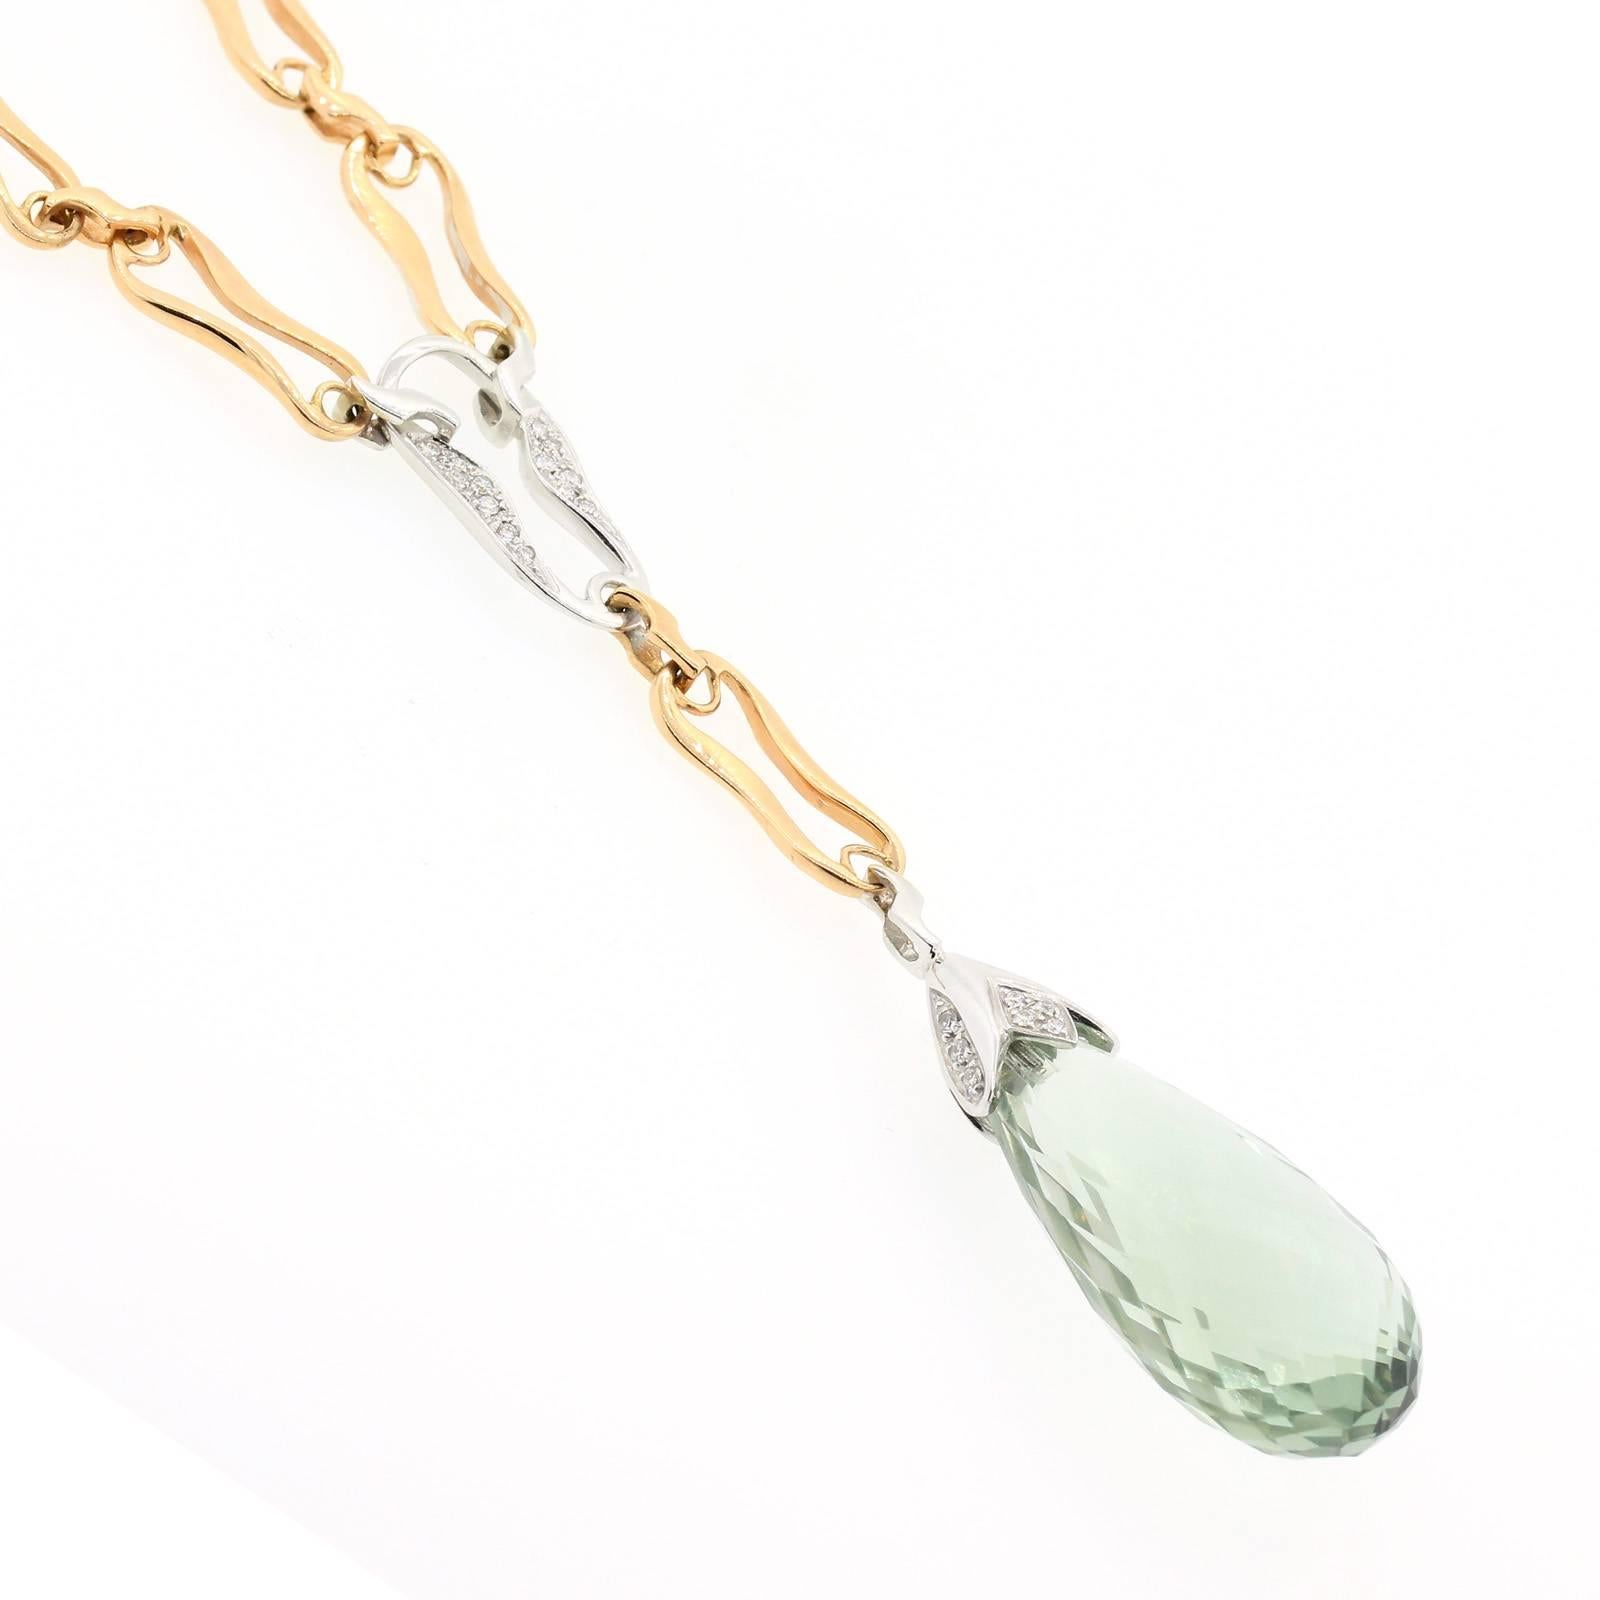 Italian made 18KT  rose gold necklace featuring a 30 carat Briolette cut Green Quartz.  The Briolette is suspended from an 18Kt white gold cup accented with  Round Brilliant Cut Diamonds, and curvy ope links.  One of the links is of white gold